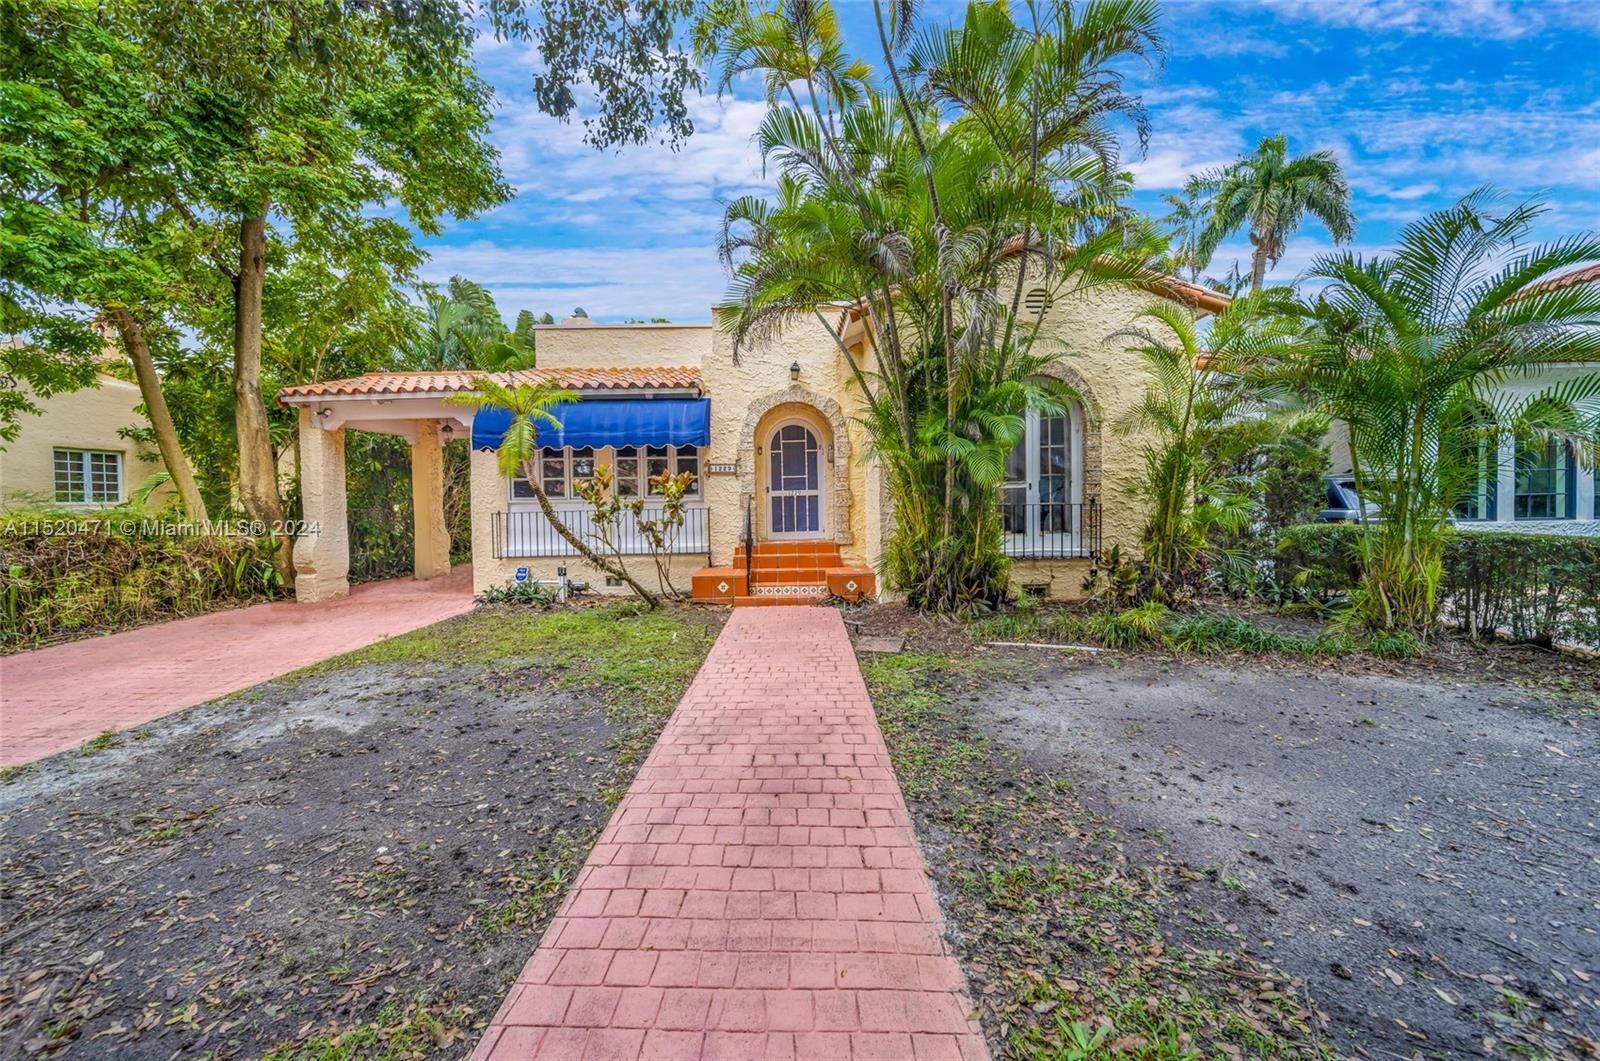 Uncover potential in this 3-bed, 2-bath single-family gem + 1 Bed / 1 Bath Guest House in the heart of Coral Gables. This historic home features 1,602 sq/ft in the main residence and 620 sq/ft in the Guest House. Situated on a 7,500 sq/ft lot, envision the possibilities to craft your dream home in this coveted location. Embrace the chance to reimagine and revitalize every corner. This canvas awaits your creative touch to restore it into a personalized sanctuary. Centrally located near all the shops, restaurants, major roads and highways. Don't miss out on this amazing opportunity to own a piece of history. PLEASE CLICK ON SHOWING TIME FOR SHOWING INSTRUCTIONS. MULTIPLE OFFERS RECEIVED. HIGHEST AND BEST ARE DUE BY 2-7-24 AT 11:59PM.